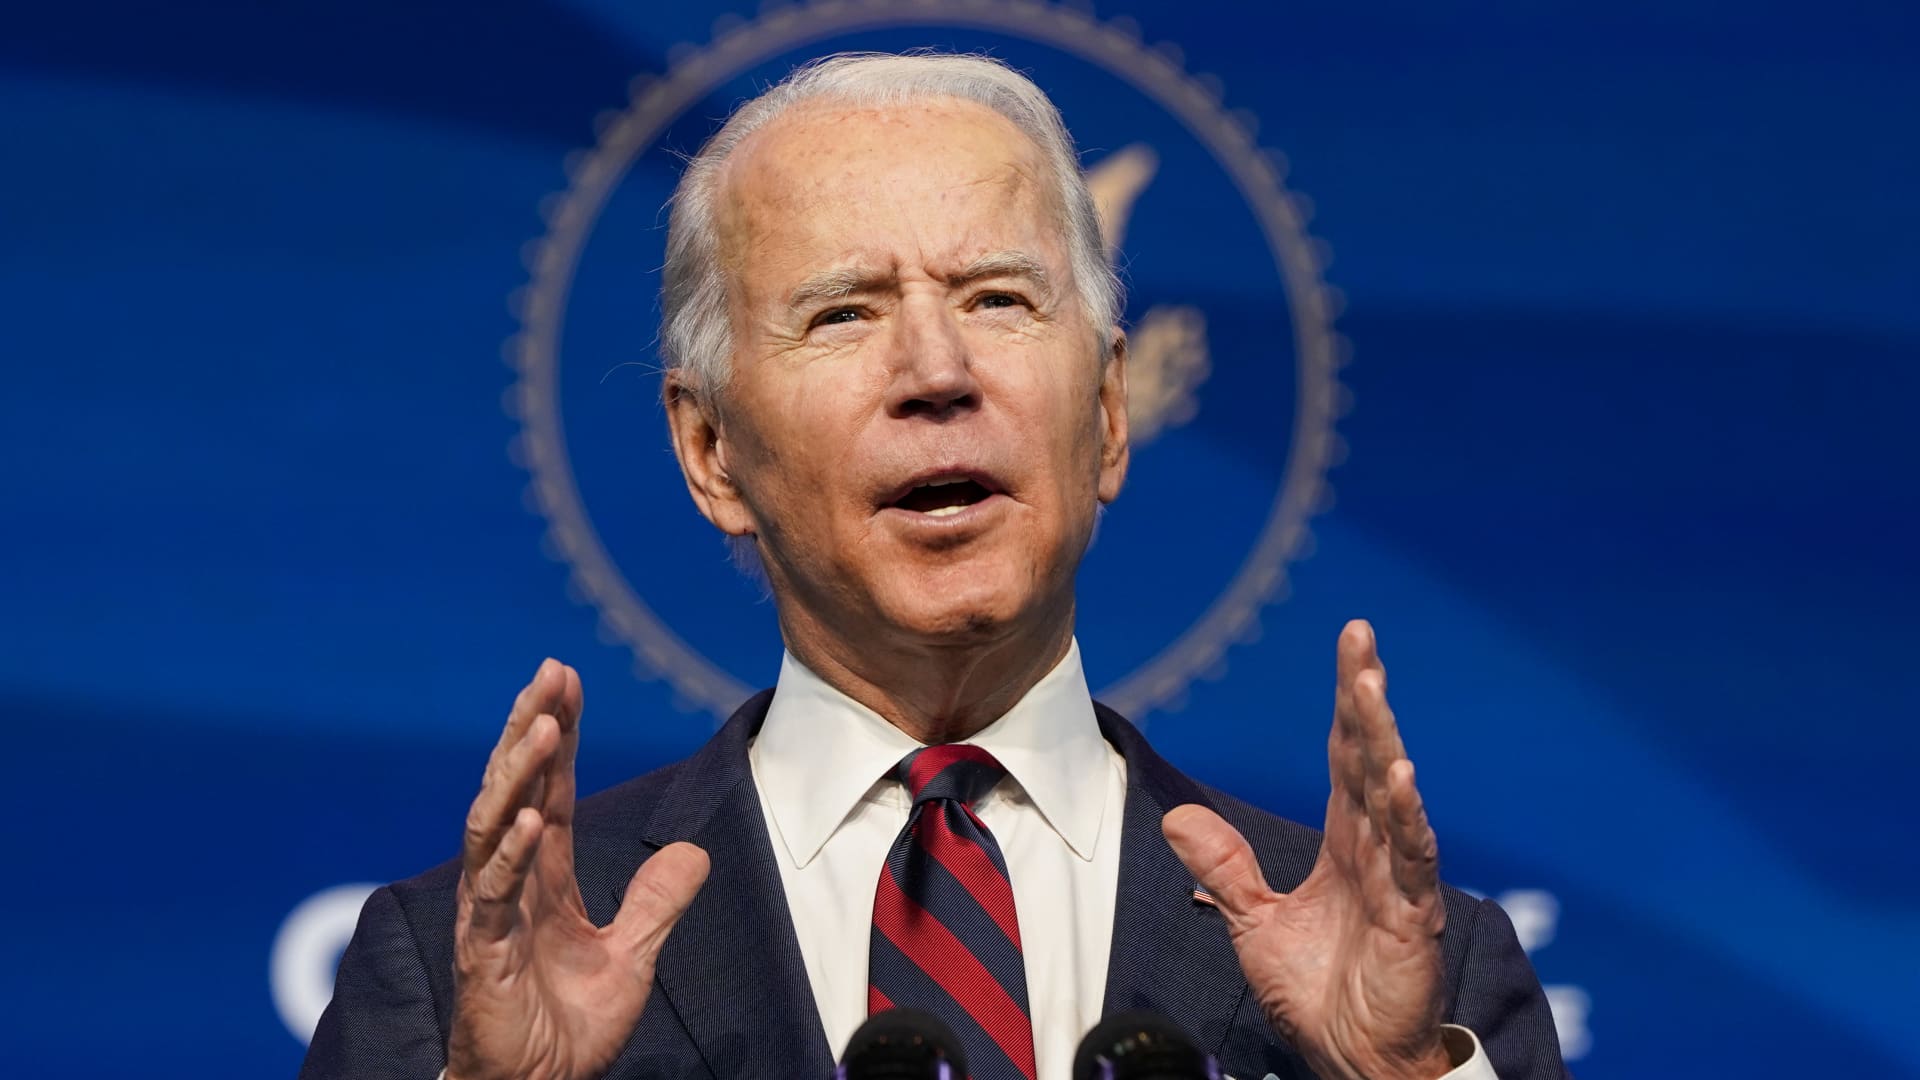 President-elect Joe Biden announces members of his climate and energy appointments at the Queen theater on December 19, 2020 in Wilmington, DE.